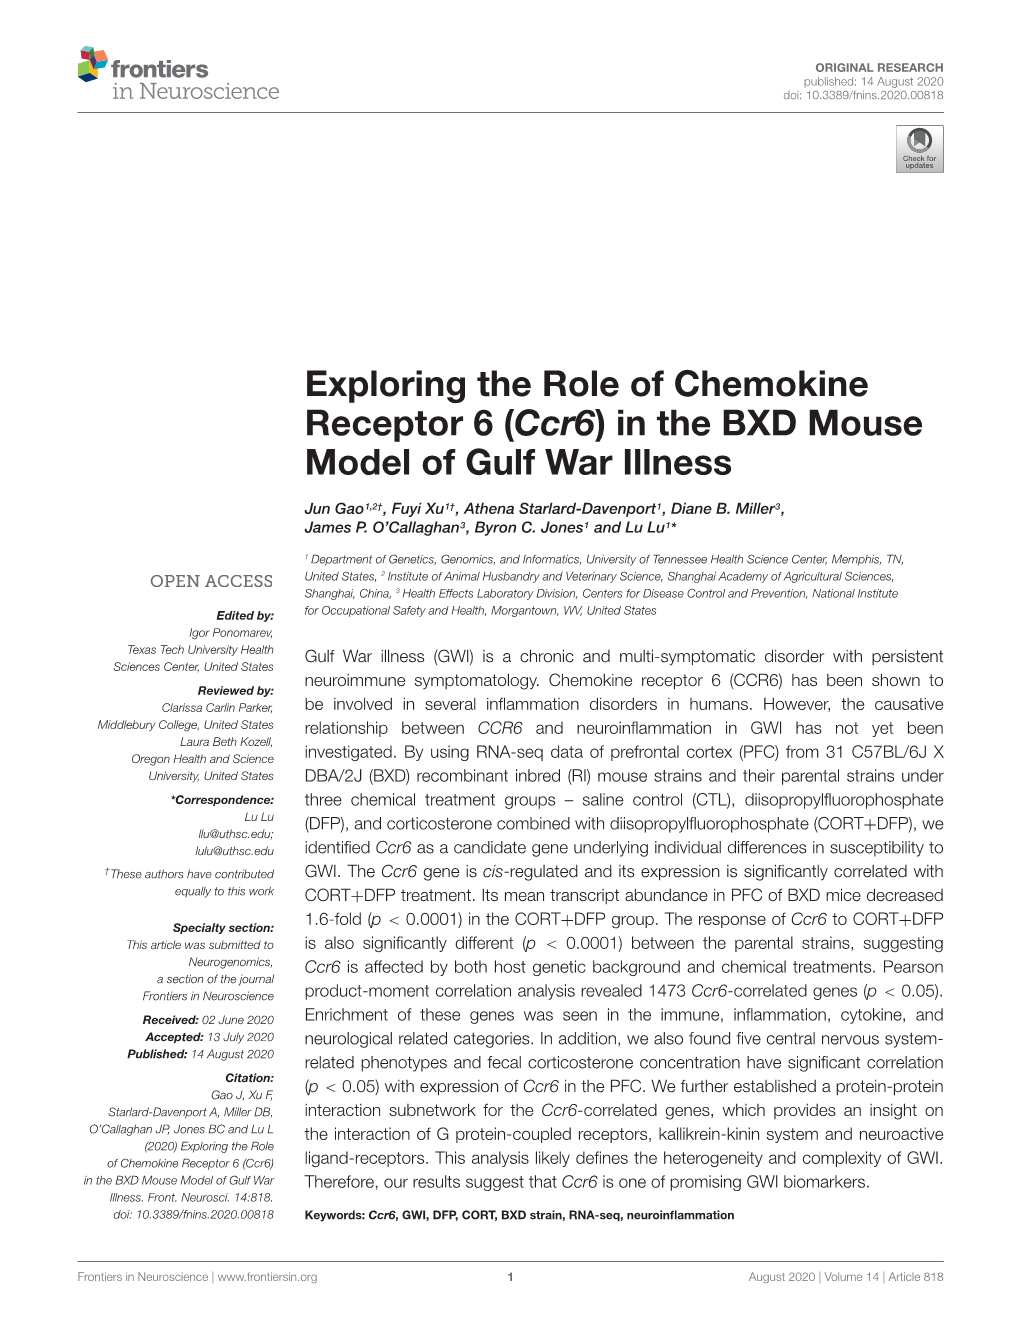 (Ccr6) in the BXD Mouse Model of Gulf War Illness